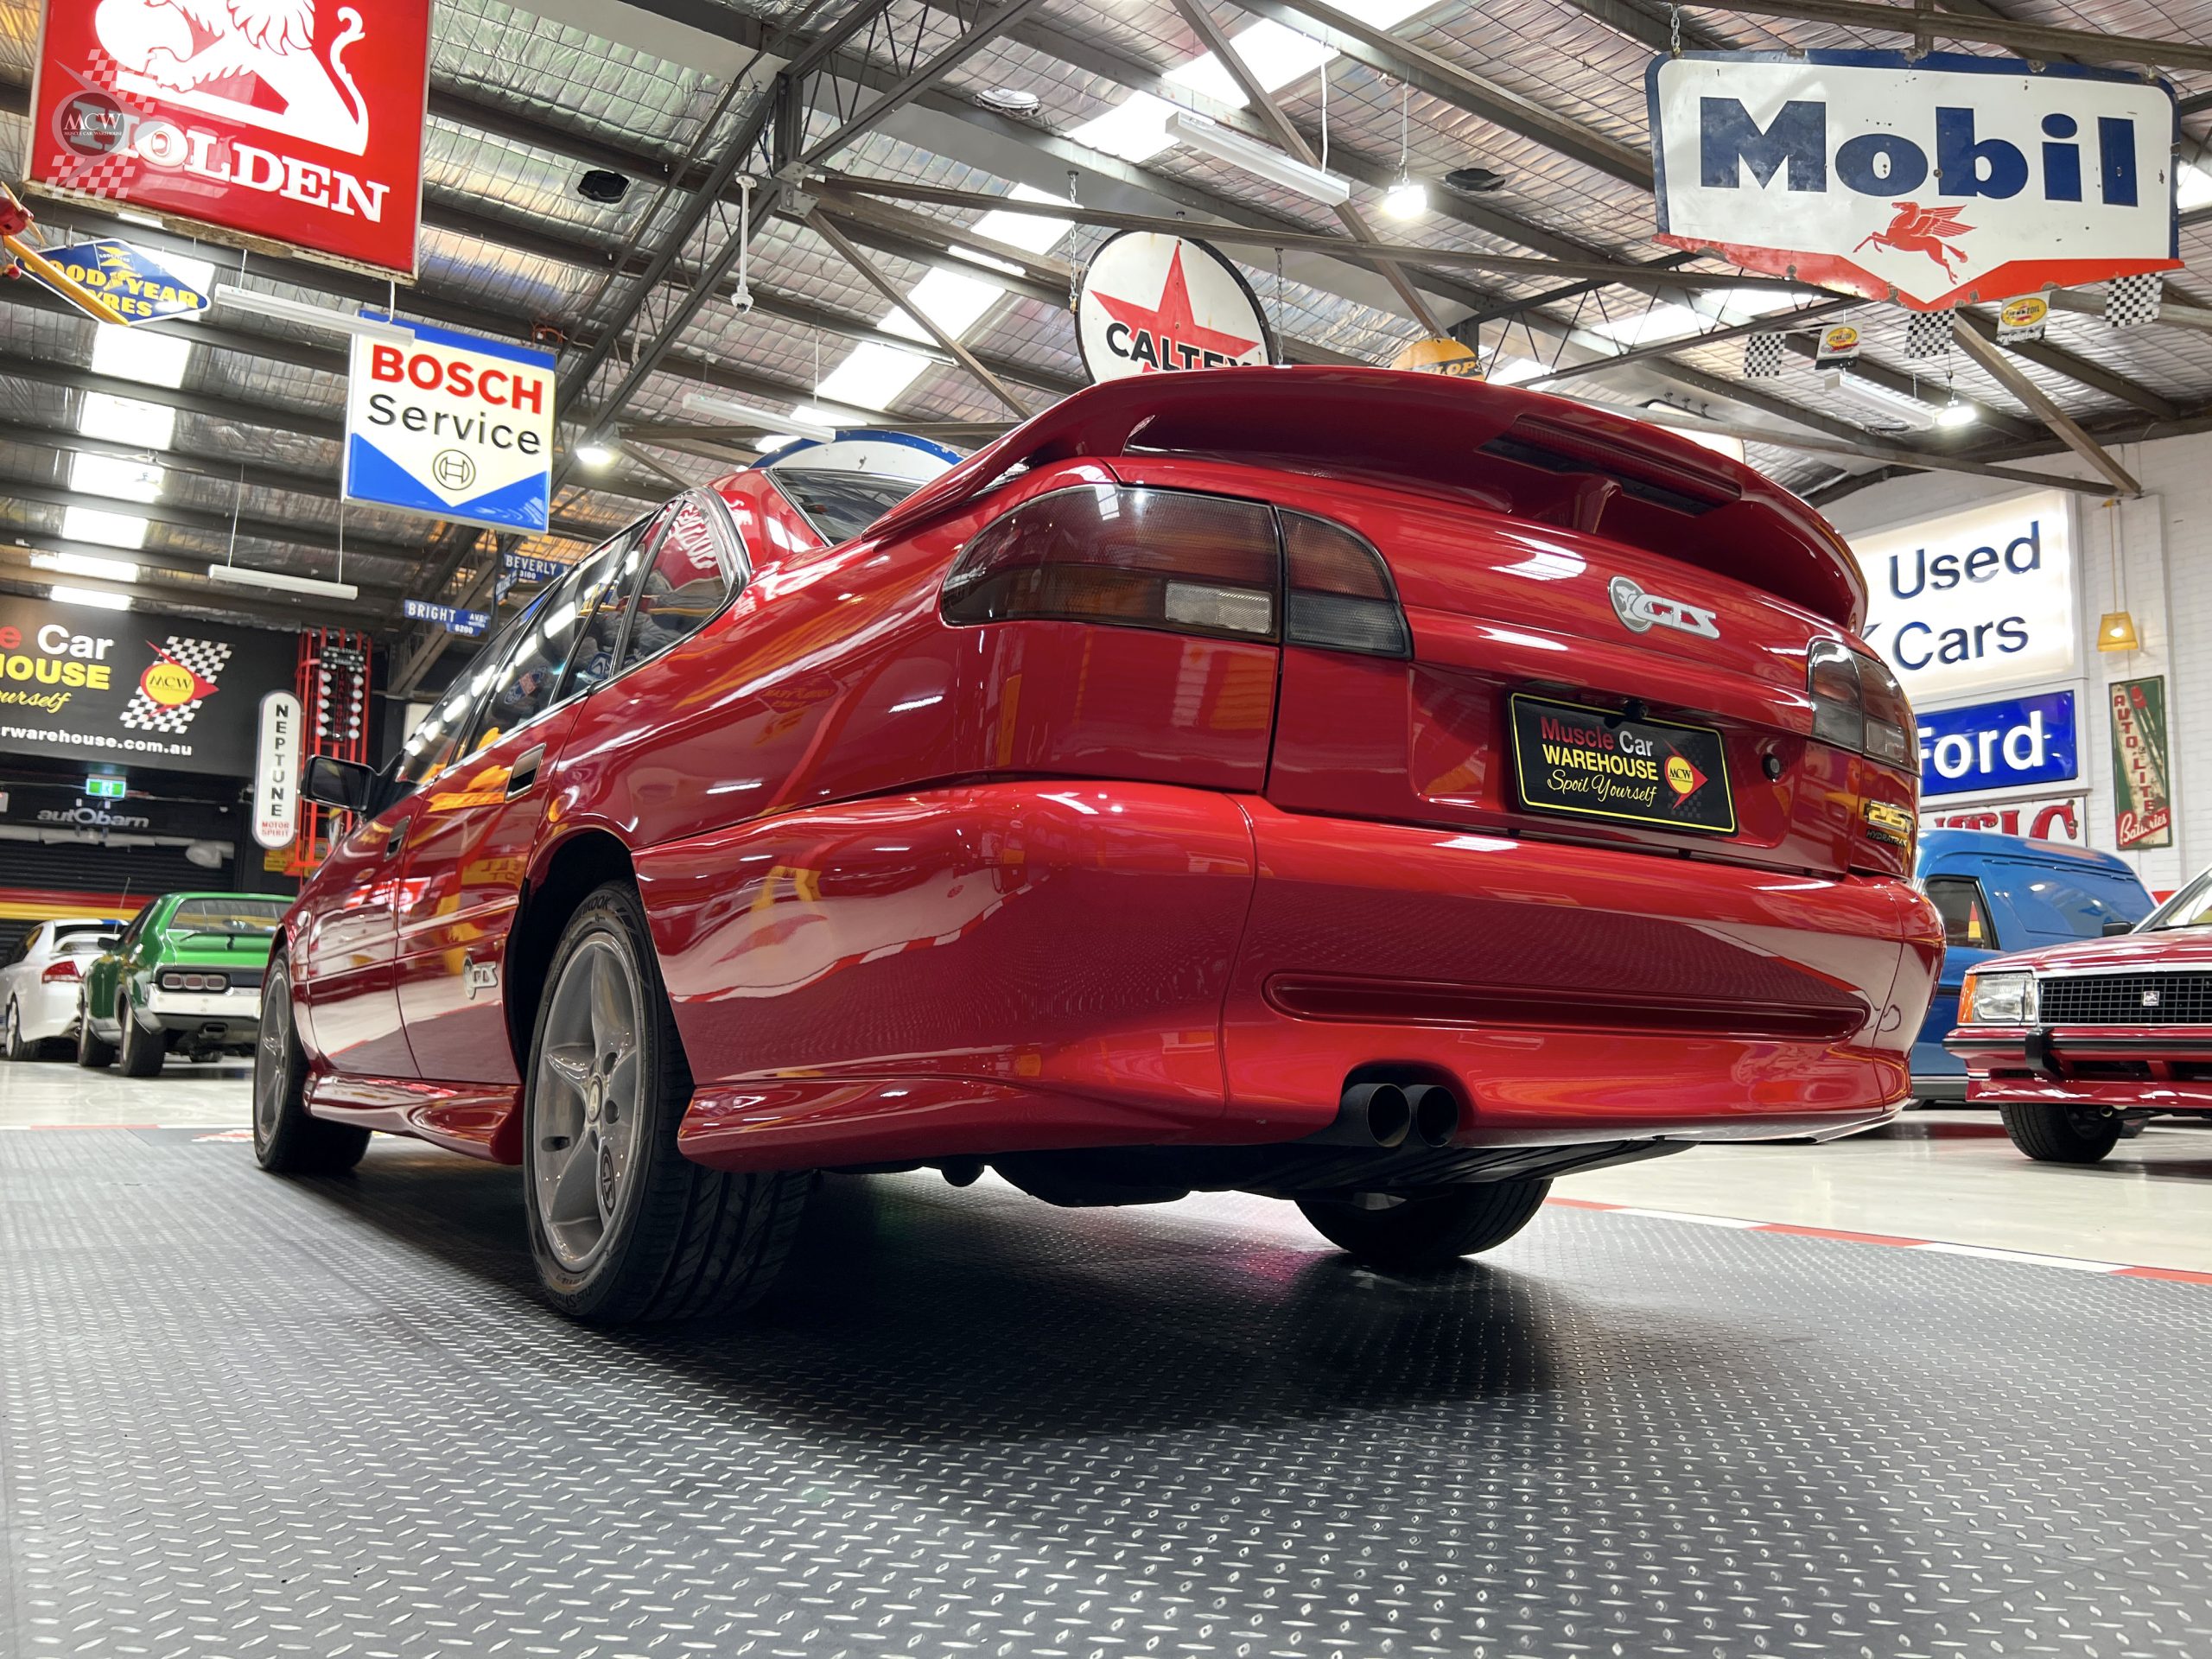 1993 Holden VR Commodore GTS Replica - Muscle Car Warehouse